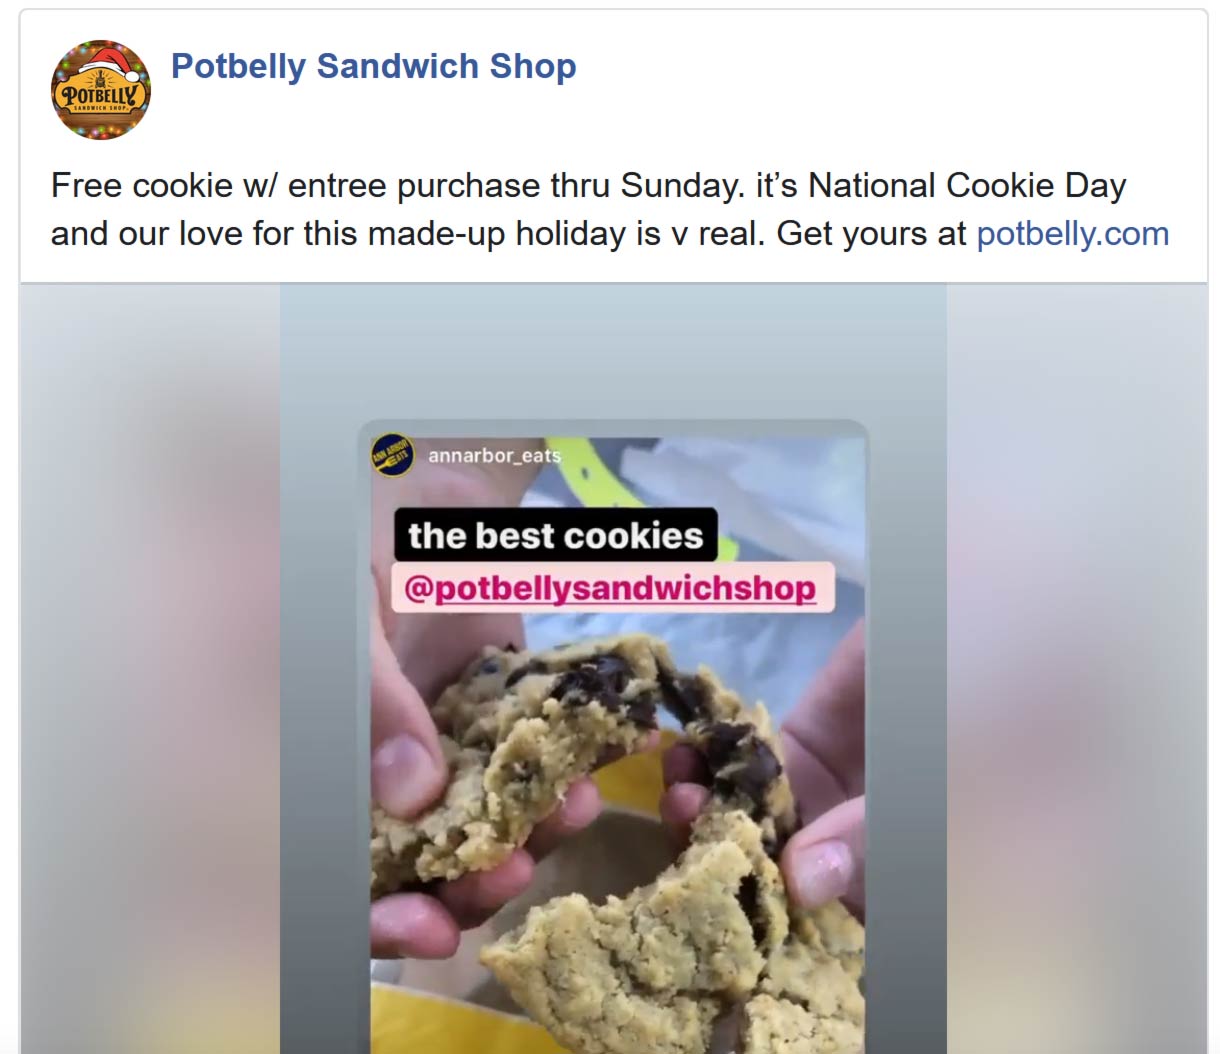 Potbelly restaurants Coupon  Free cookie with your entree at Potbelly Sandwich Shop #potbelly 